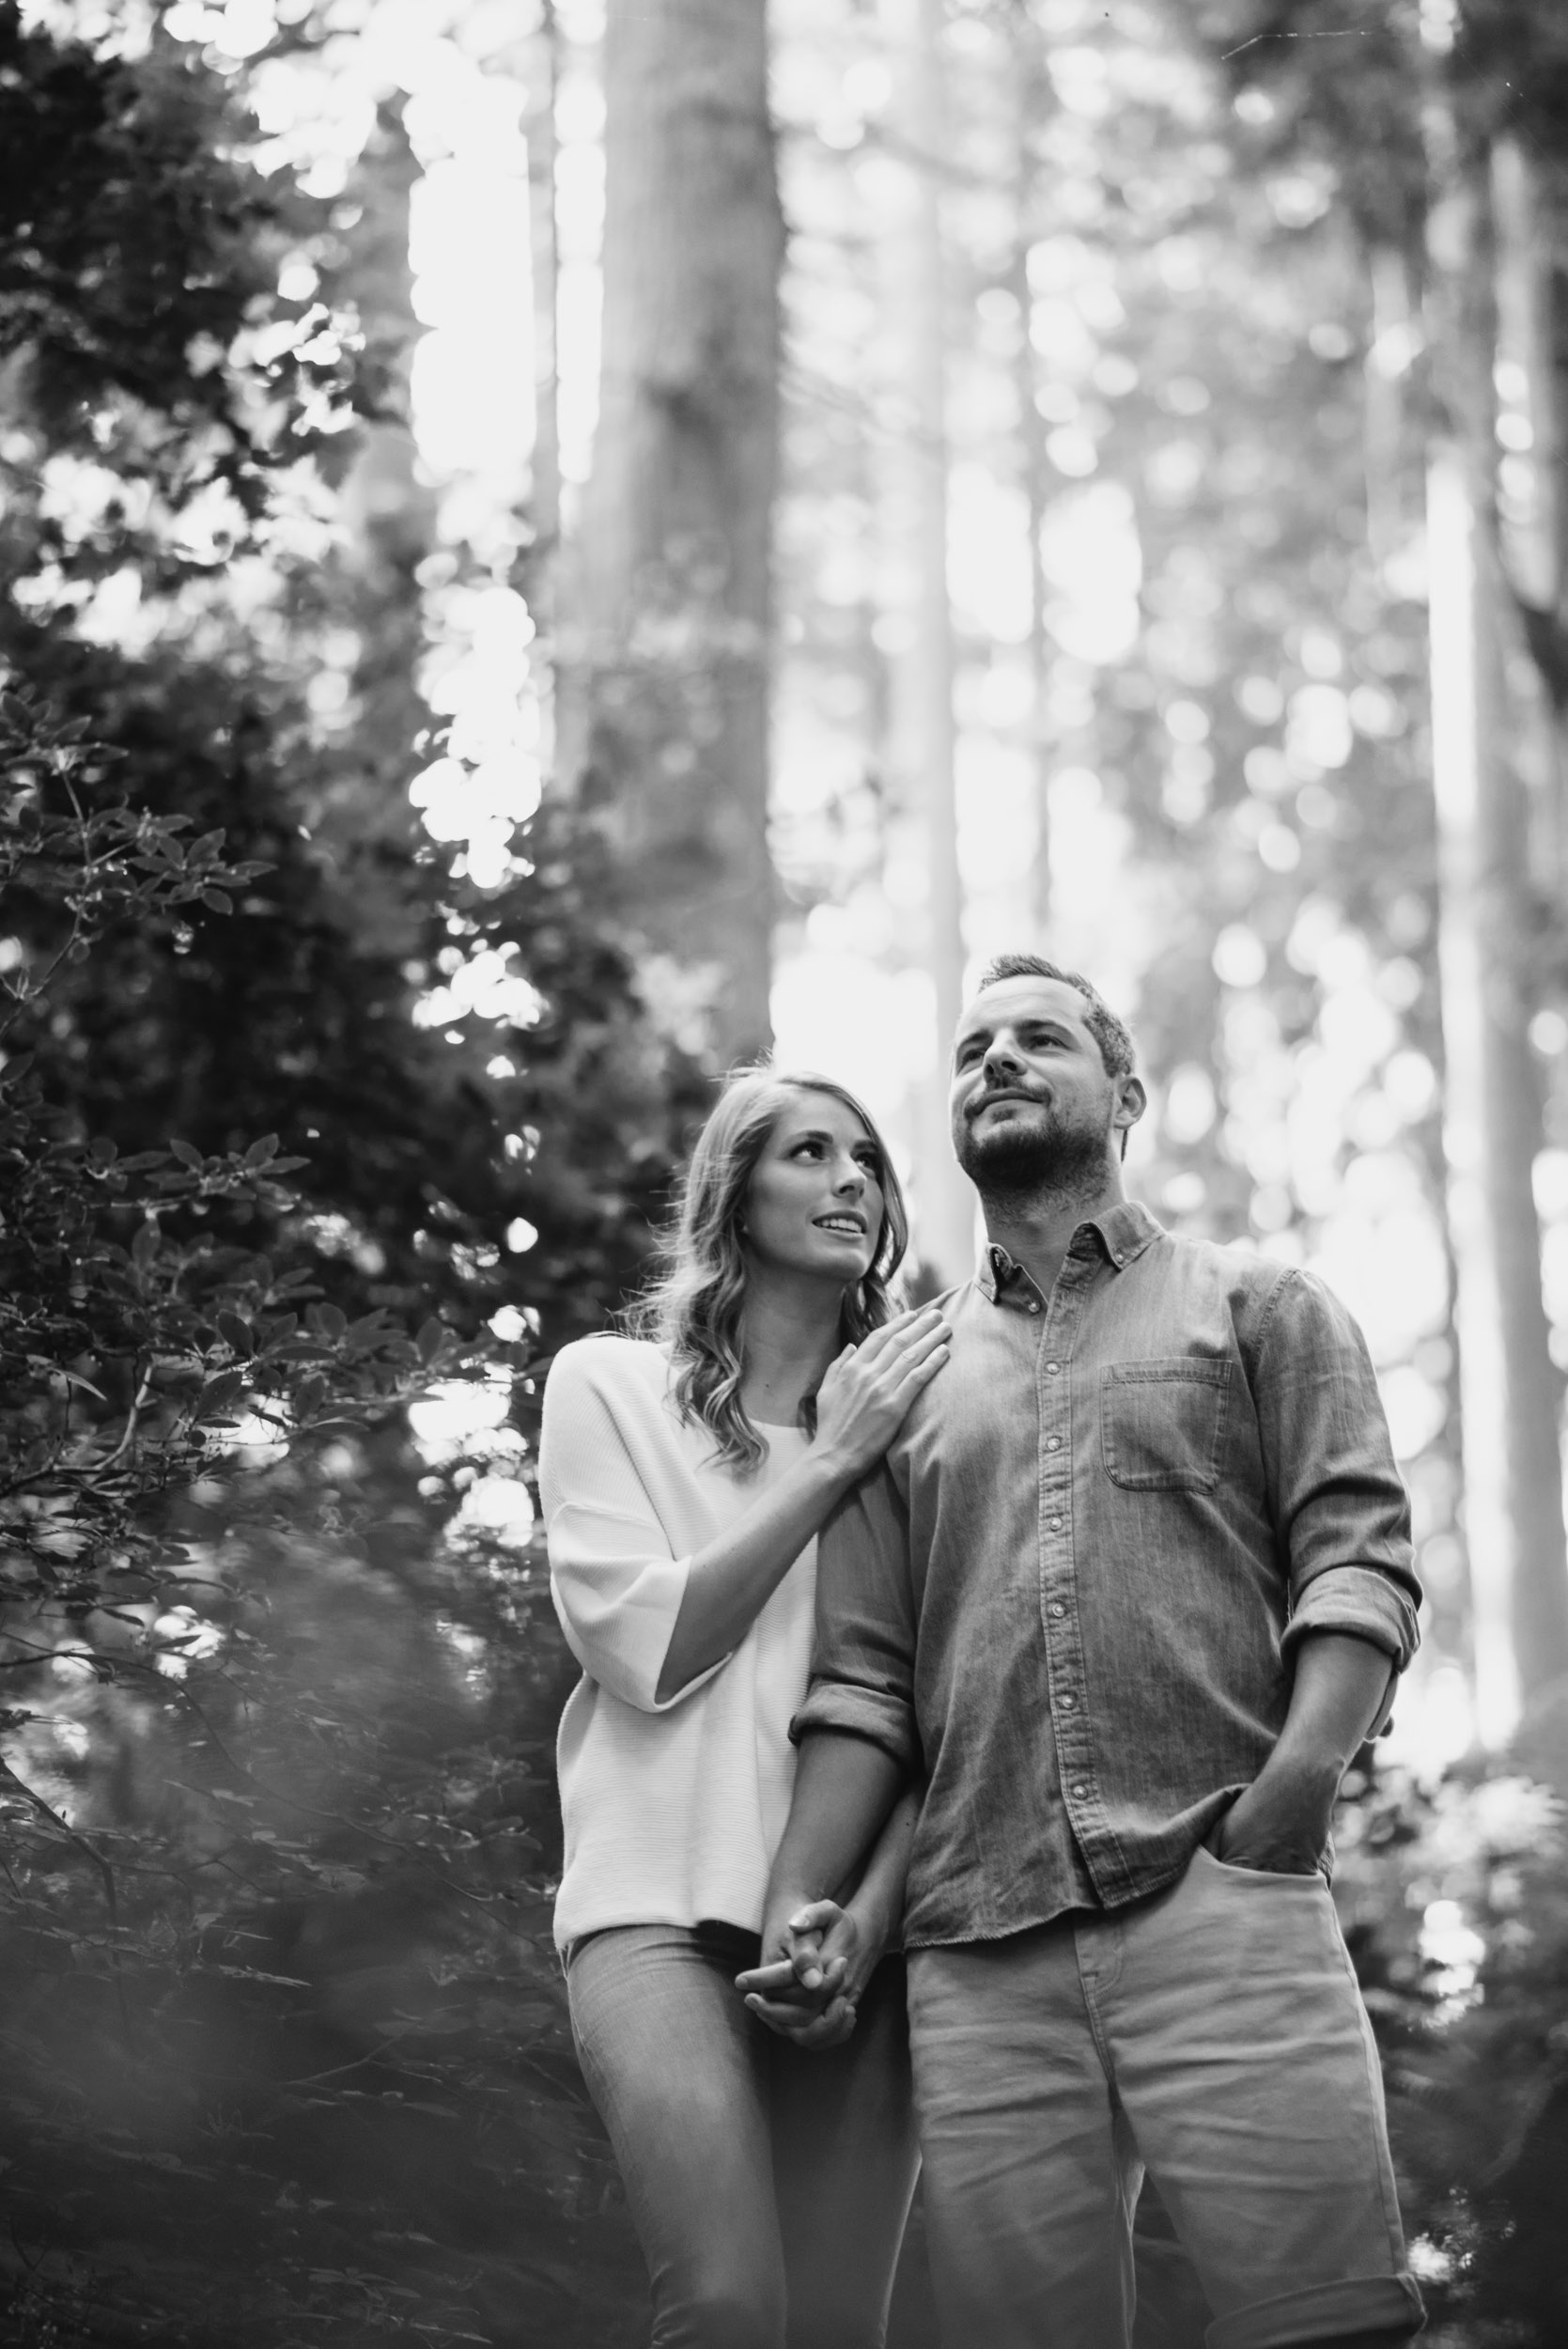 Couple looks off into the distance in the forest